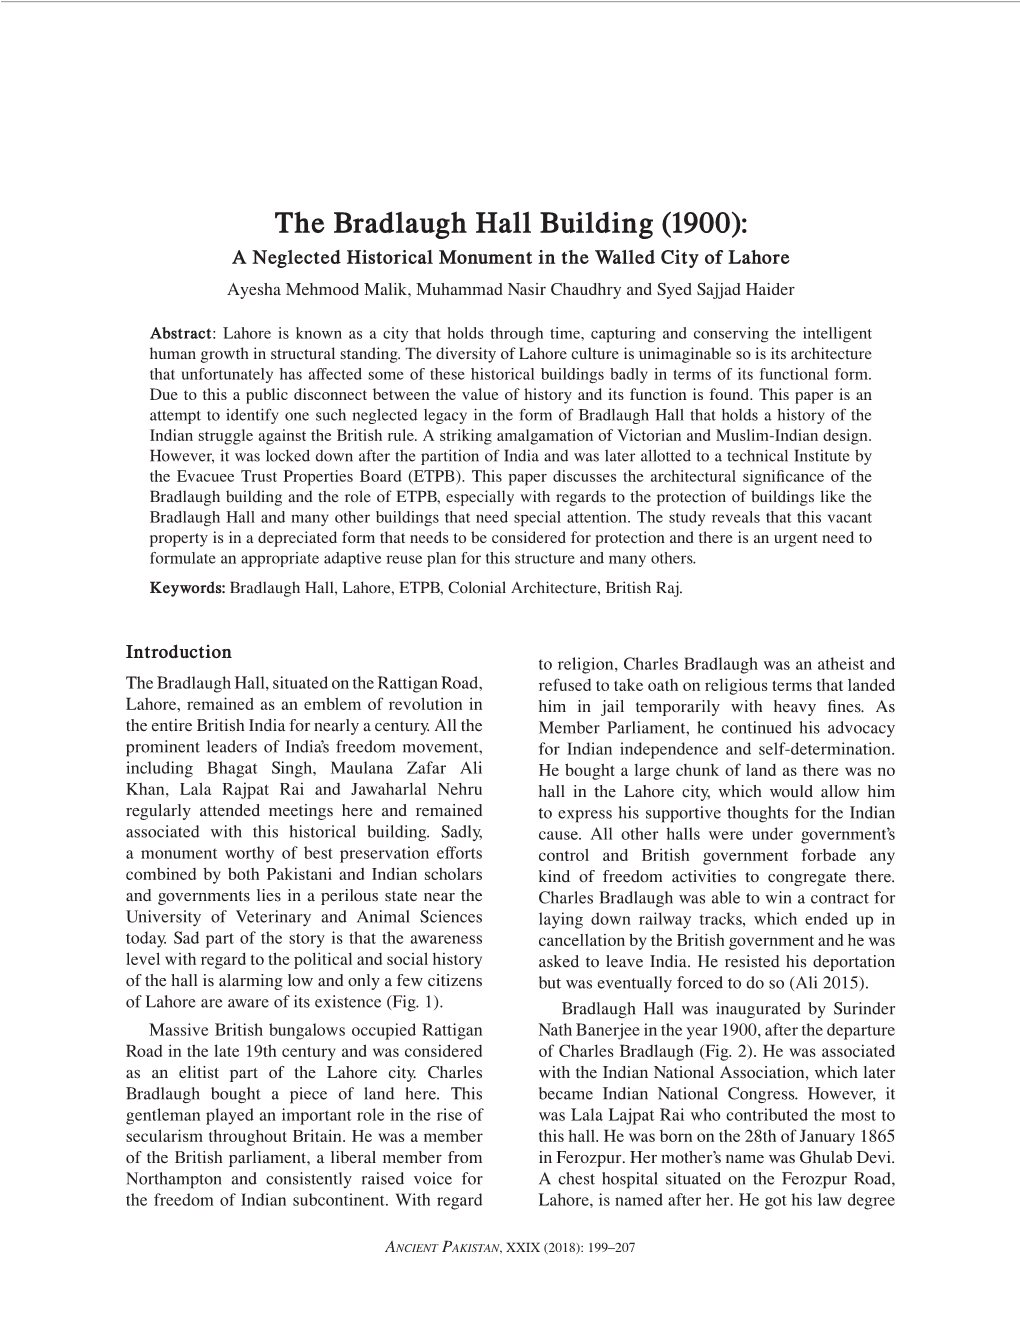 The Bradlaugh Hall Building (1900): a Neglected Historical Monument in the Walled City of Lahore Ayesha Mehmood Malik, Muhammad Nasir Chaudhry and Syed Sajjad Haider